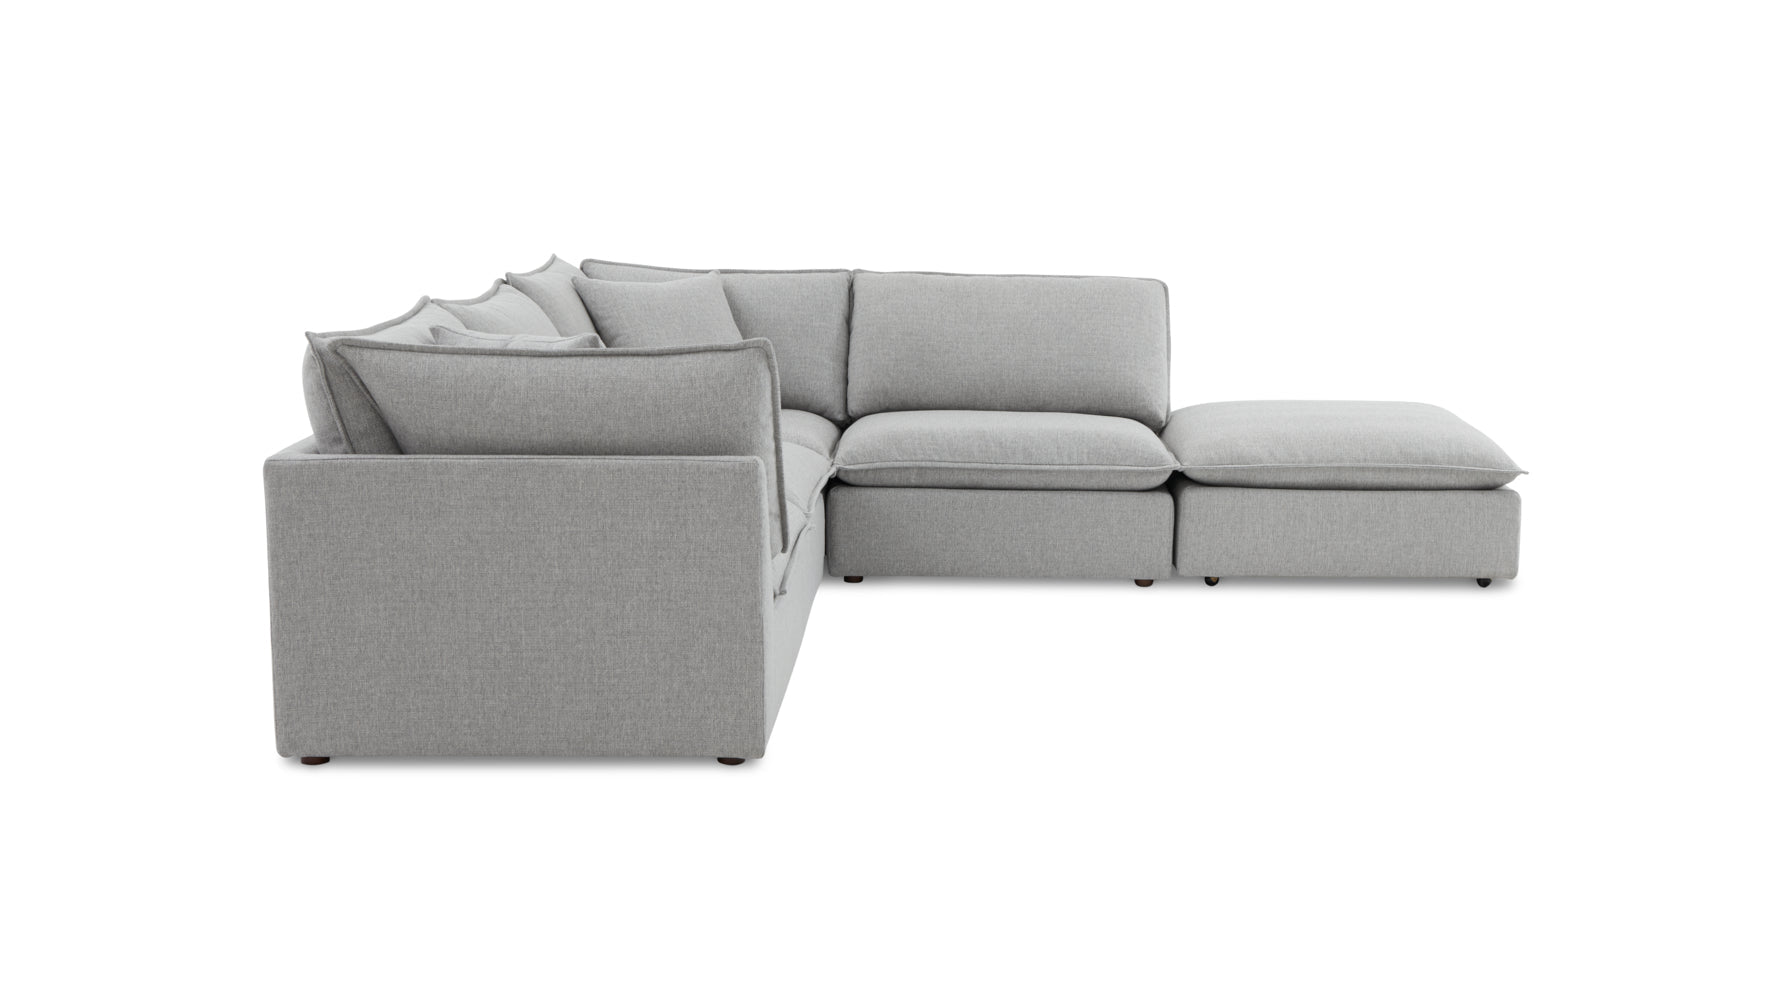 Chill Time 5-Piece Modular Sectional, Heather - Image 3